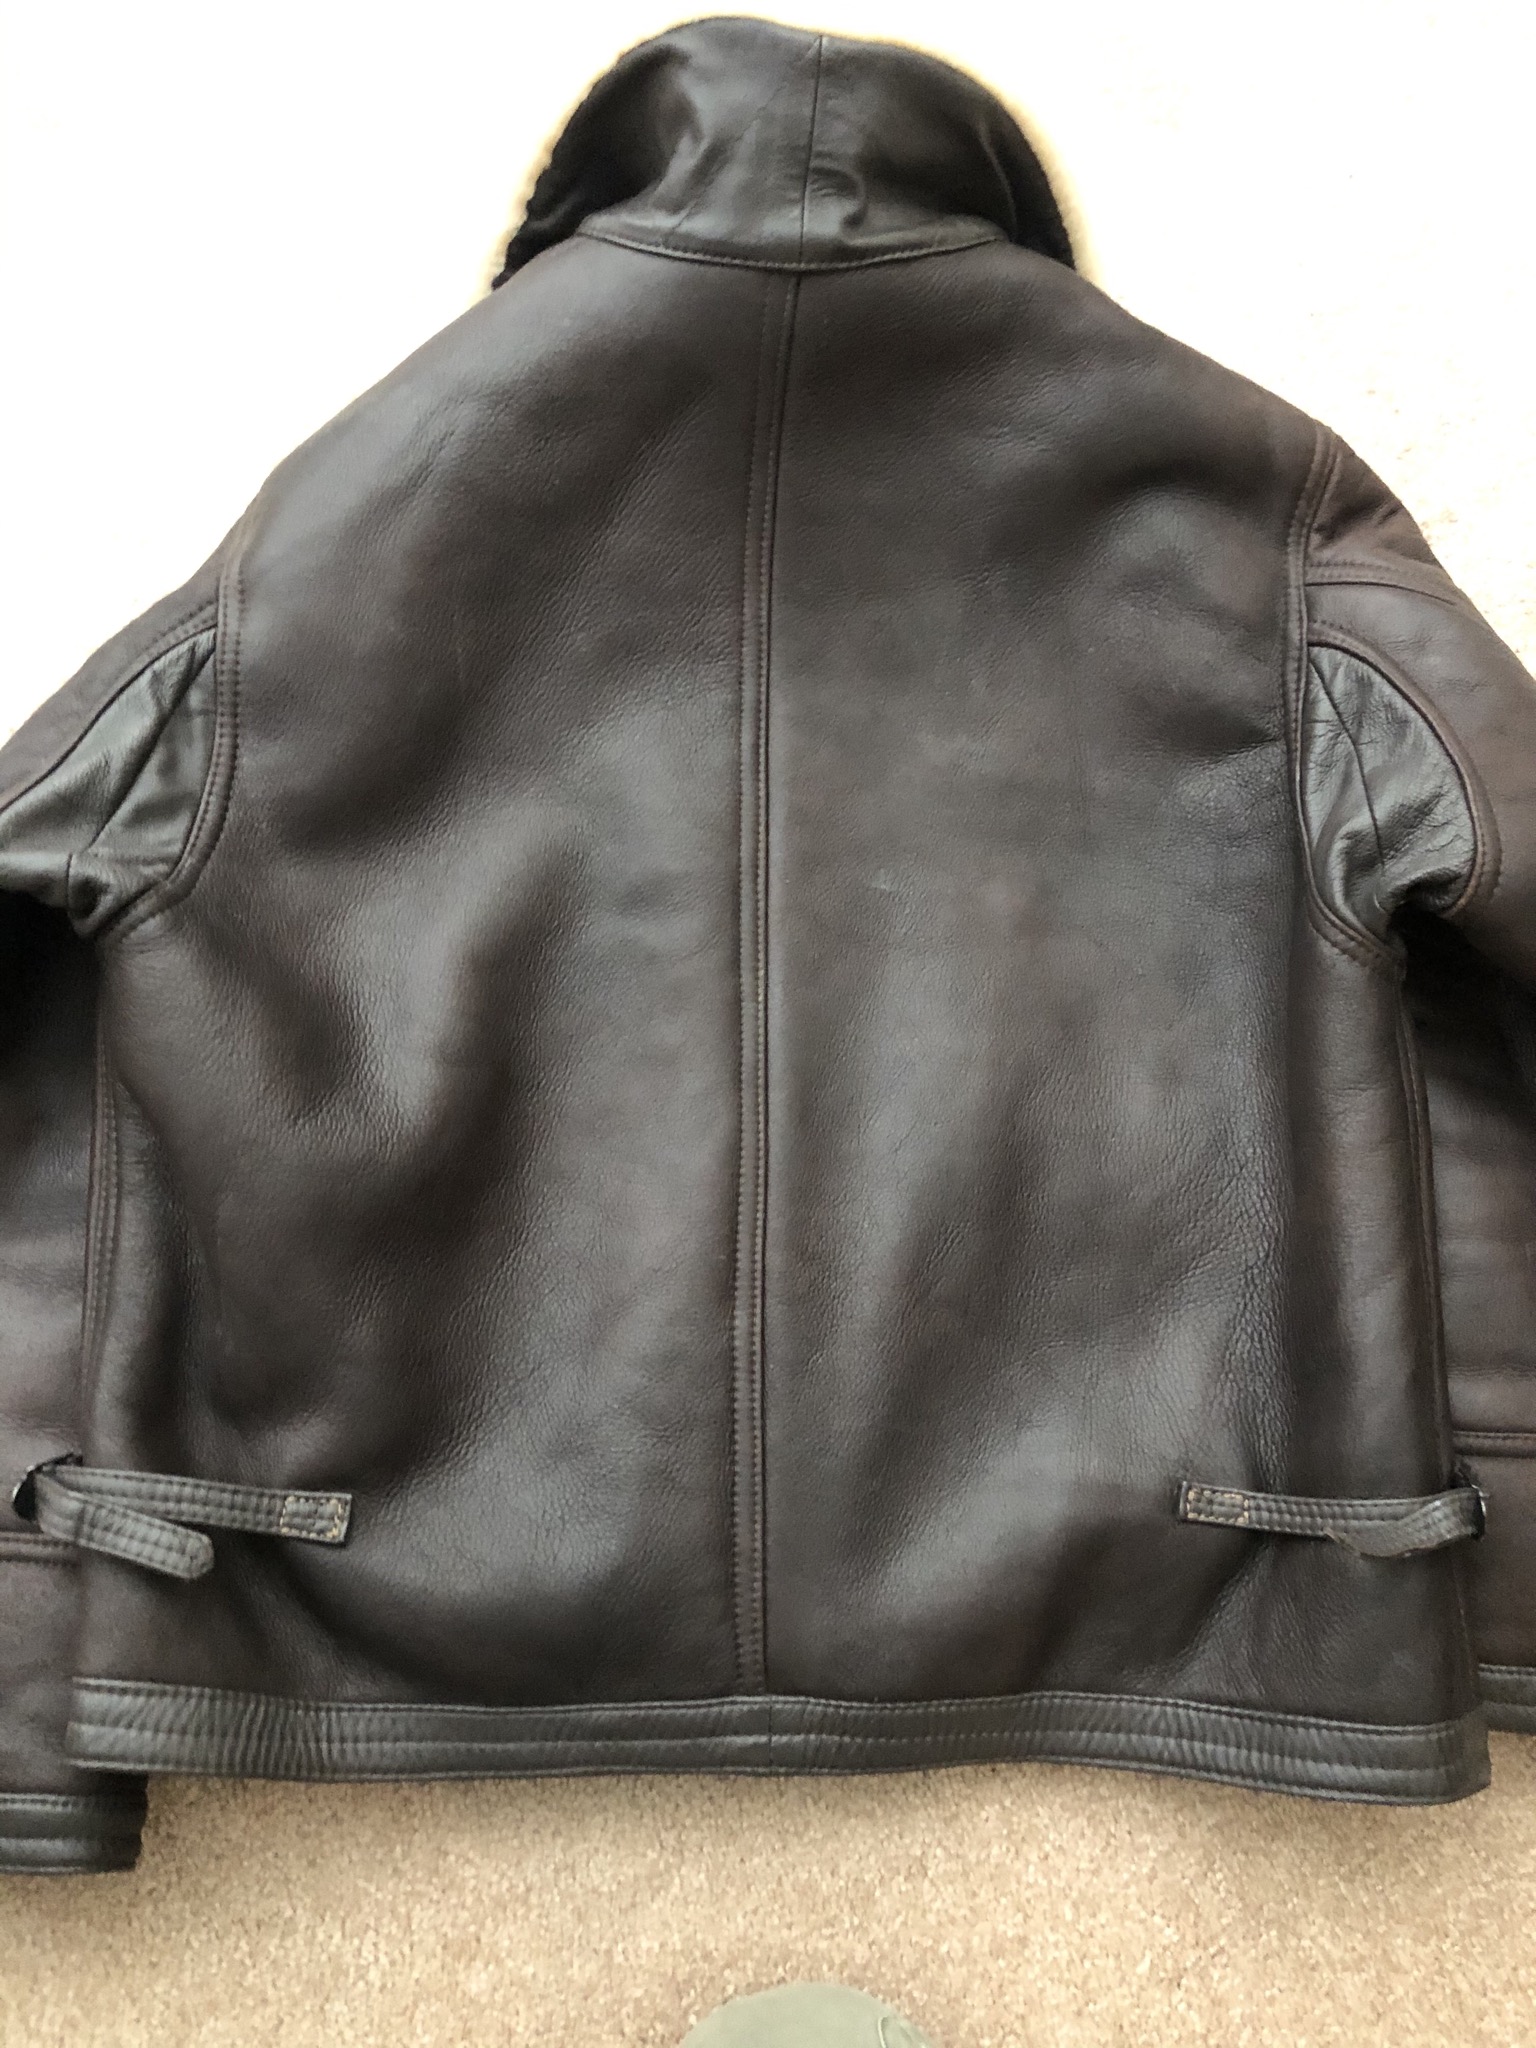 FiveStar Leather Looking for Recommendations on M-445A Jacket | Page 2 ...